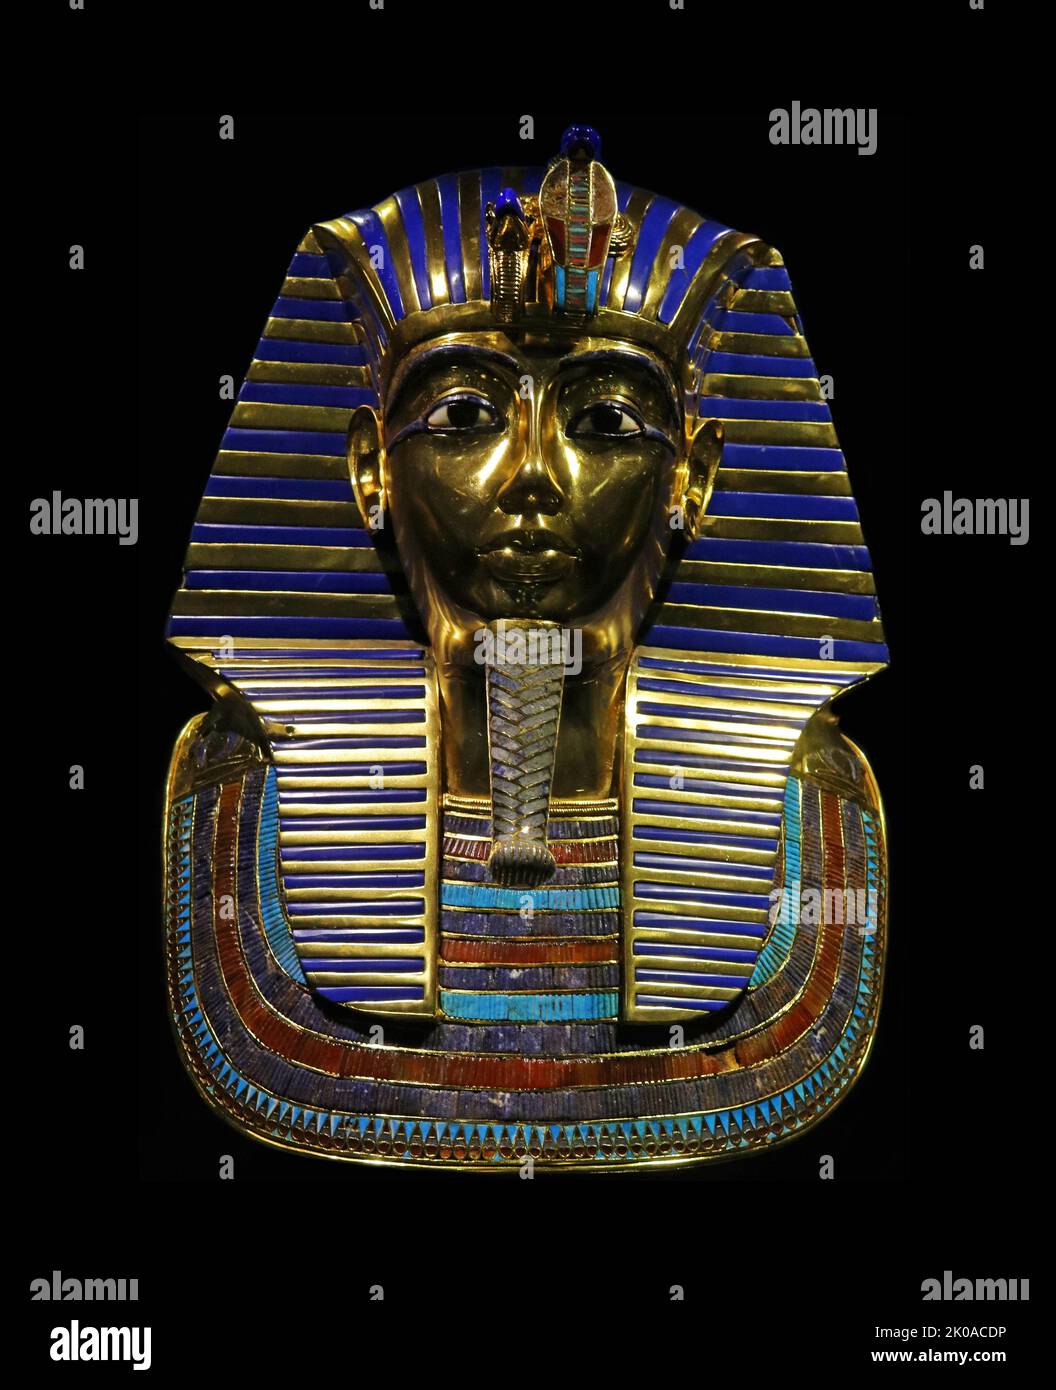 The mask of Tutankhamun is a gold mask of the 18th-dynasty ancient Egyptian Pharaoh Tutankhamun (reigned 1334-1325 BC). It was discovered by Howard Carter in 1925 in tomb KV62 in the Valley of the Kings, and is now housed in the Egyptian Museum in Cairo. The death mask is one of the best-known works of art in the world and a prominent symbol of ancient Egypt Stock Photo